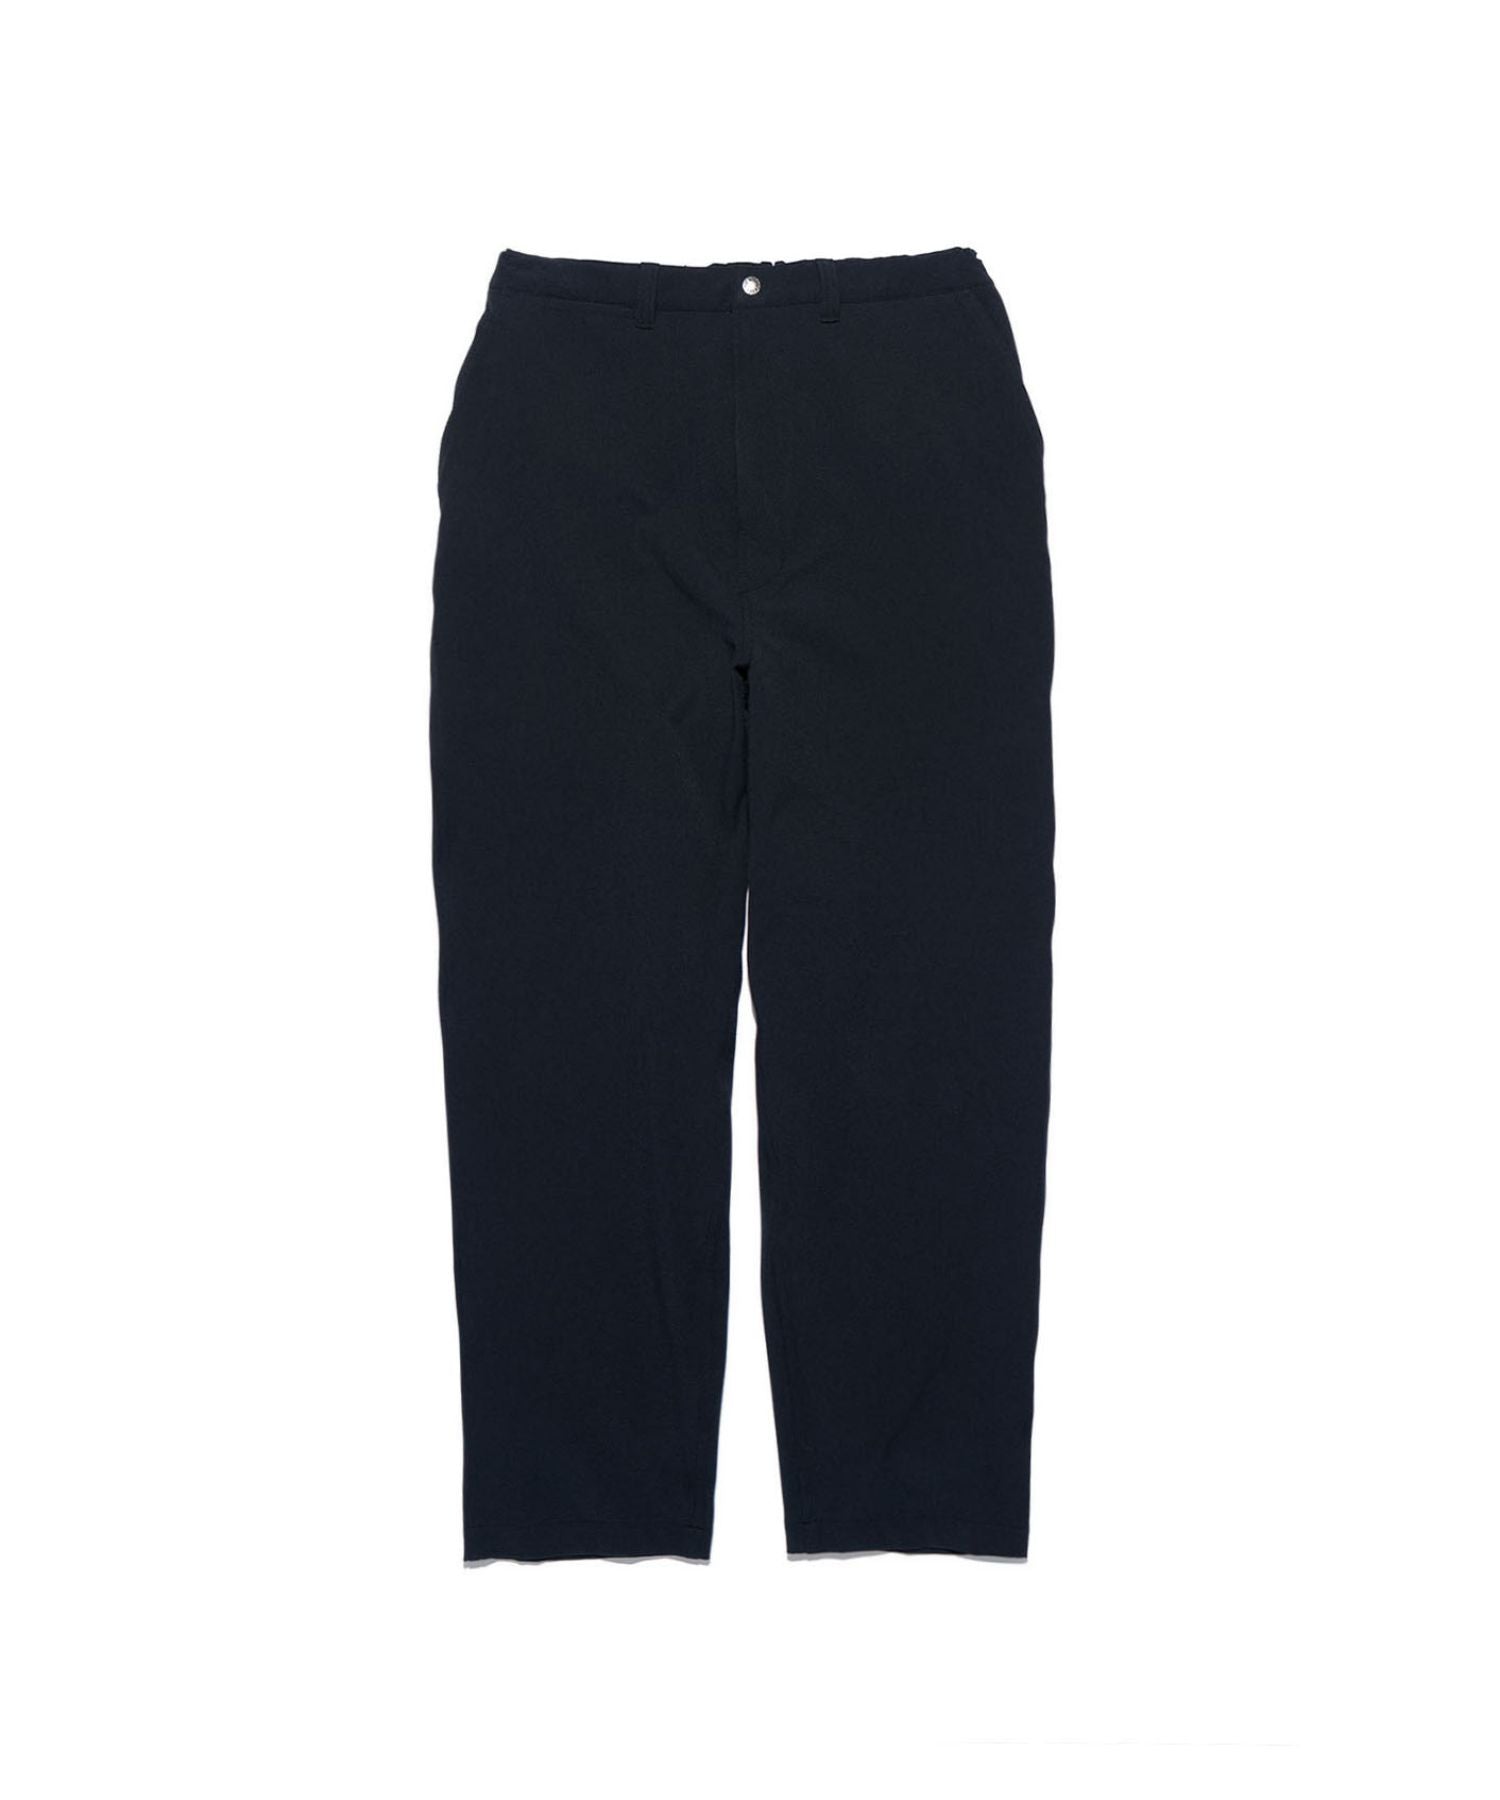 Stretch Twill Wide Tapered Field Pants